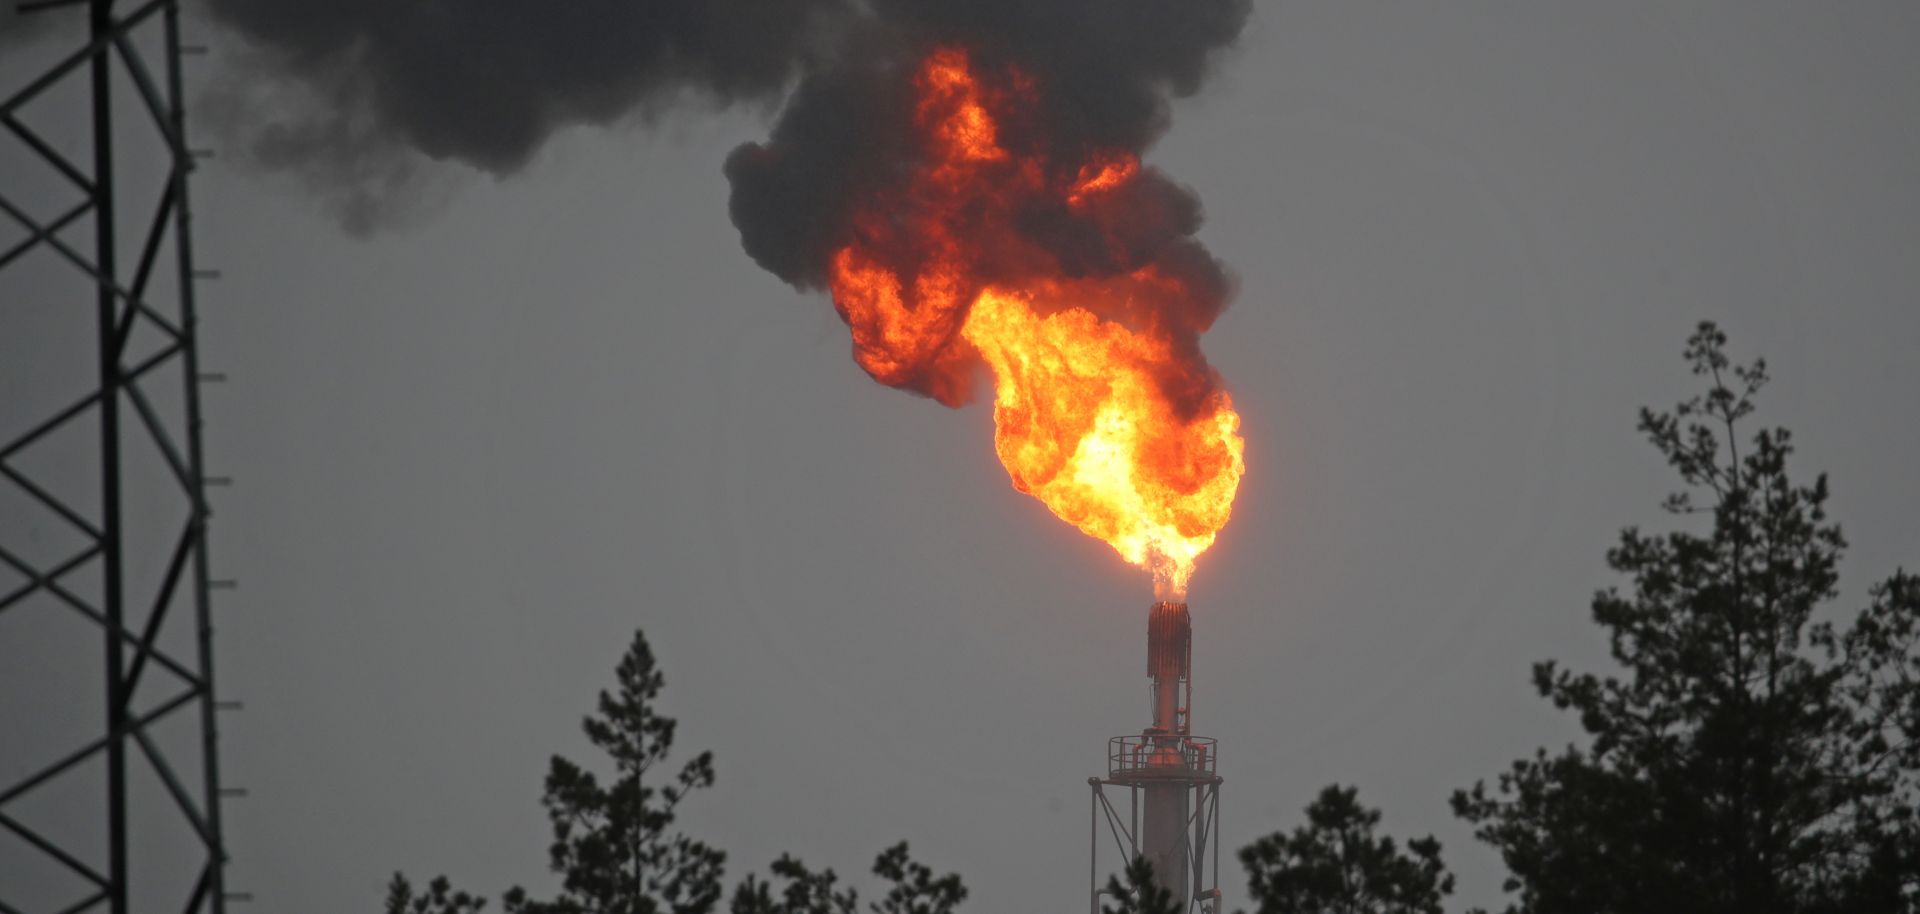 An image of a gas flare at the Mozyr Oil Refinery in Belarus on Jan. 4, 2020. Russia recently resumed its oil deliveries to Belarus after a pricing dispute prompted Moscow to halt its supplies at the beginning of the year.